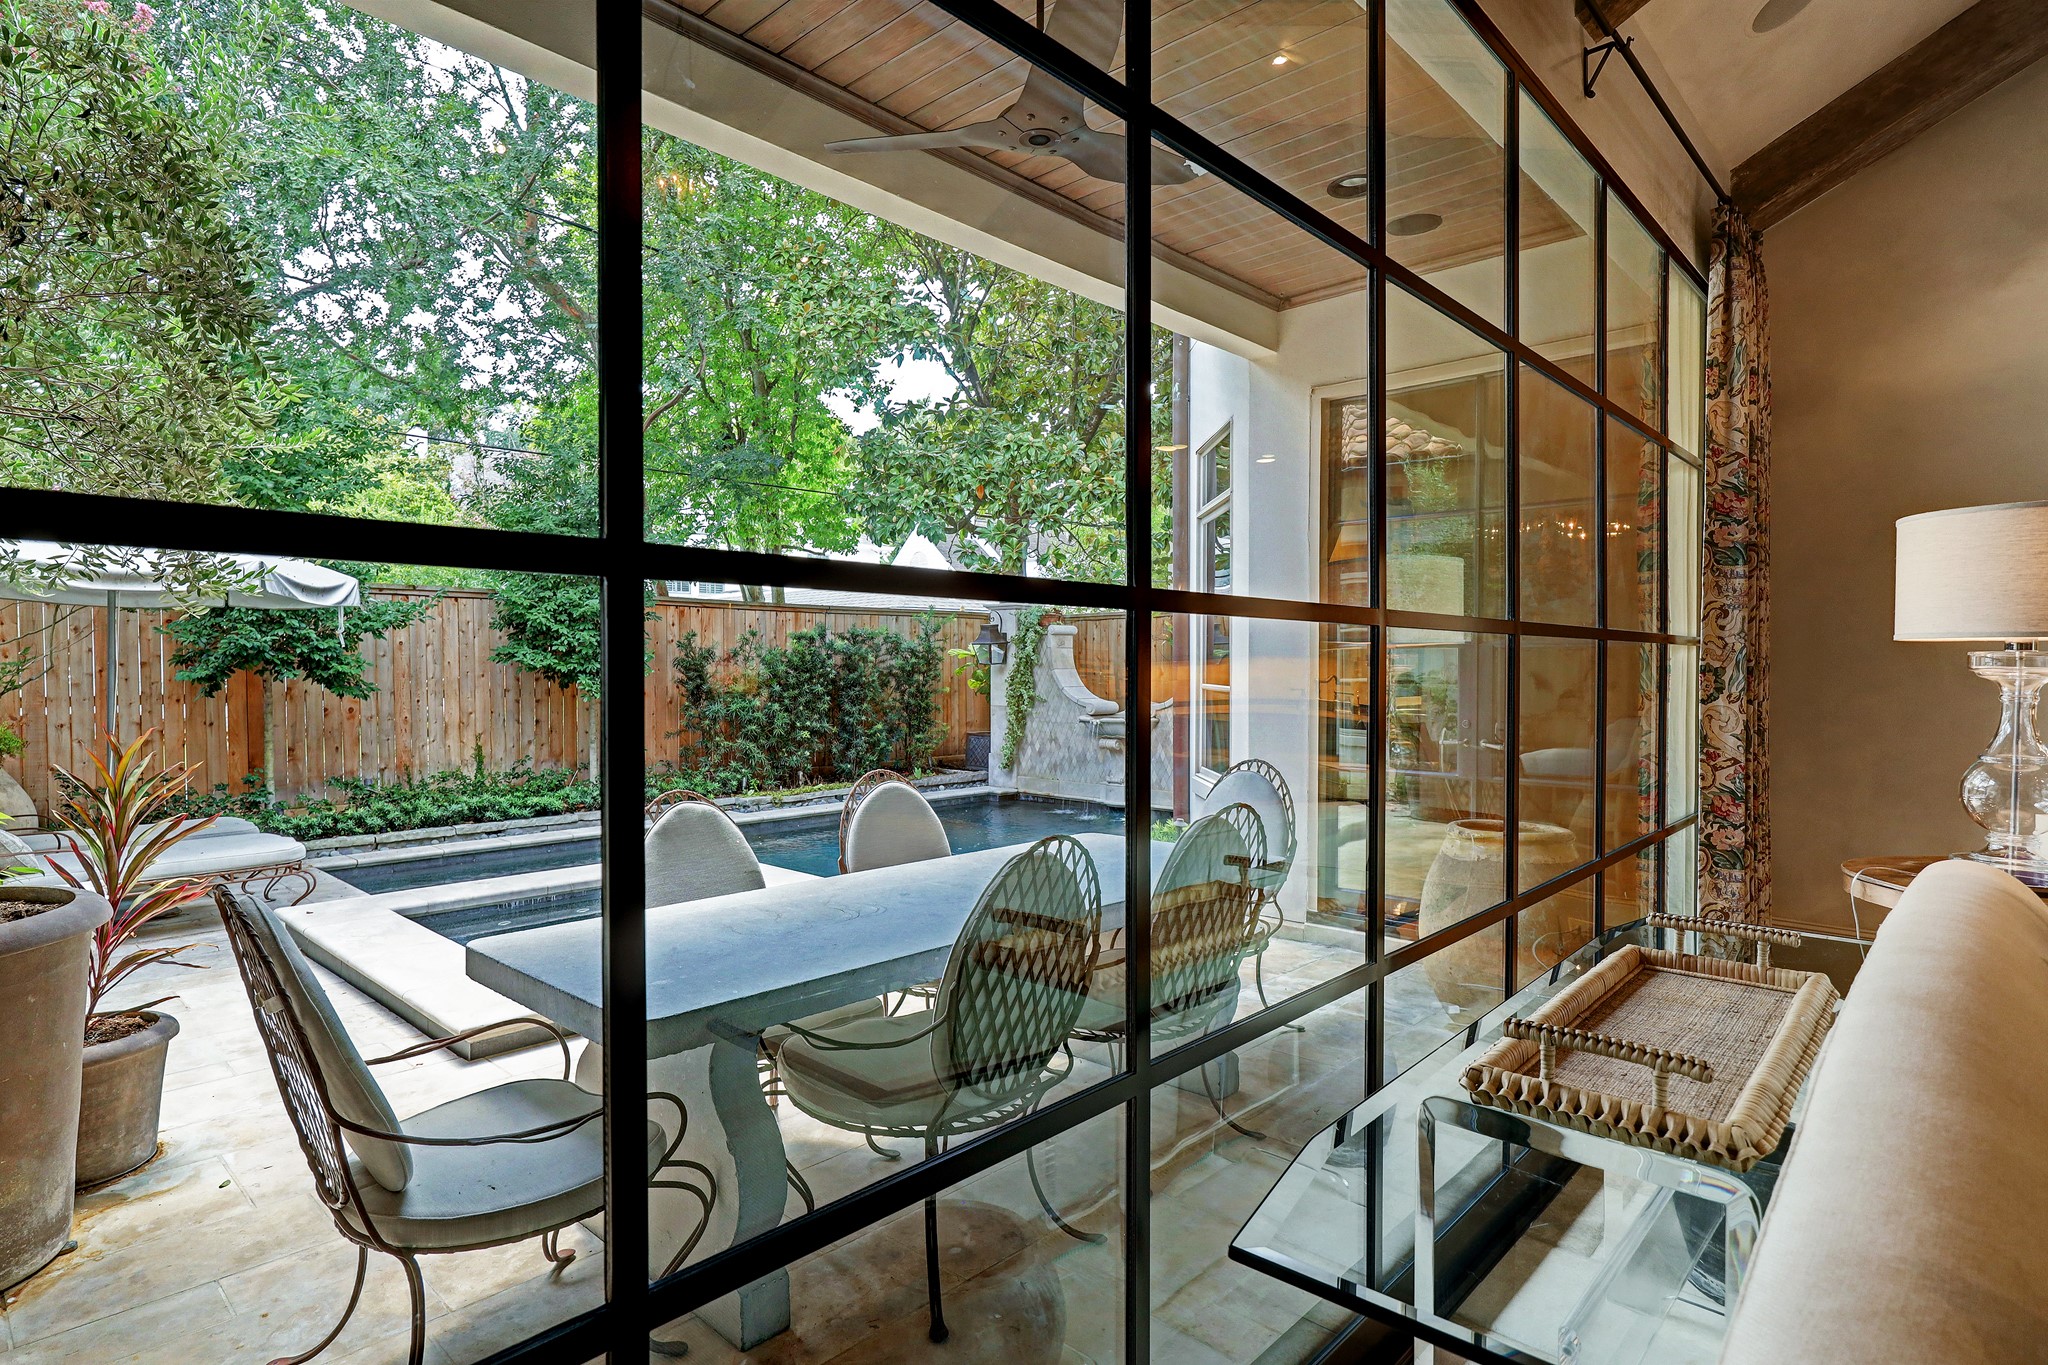 A sweeping wall of floor-to-ceiling steel framed windows provides an exceptional view of the verdant backyard blurring the lines between interior comfort and the natural allure of the exterior oasis.